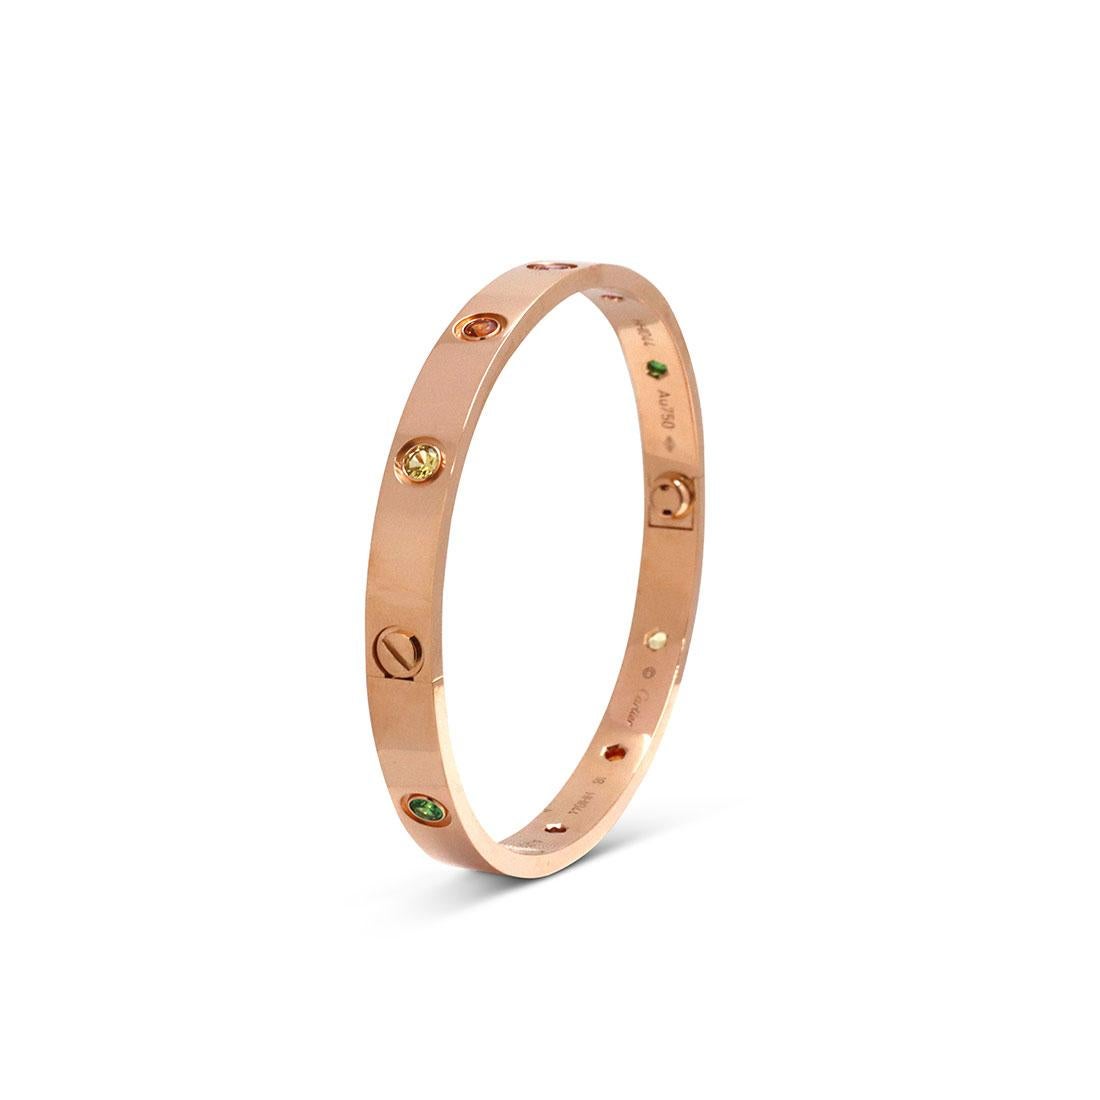 Authentic Cartier 'Love' bracelet crafted in 18 karat rose gold. The bracelet is set with 2 pink sapphires, 2 yellow sapphires, 2 green garnets, 2 orange garnets and 2 amethysts. Size 18. Signed Cartier, 18, Au750, with serial number and hallmarks.